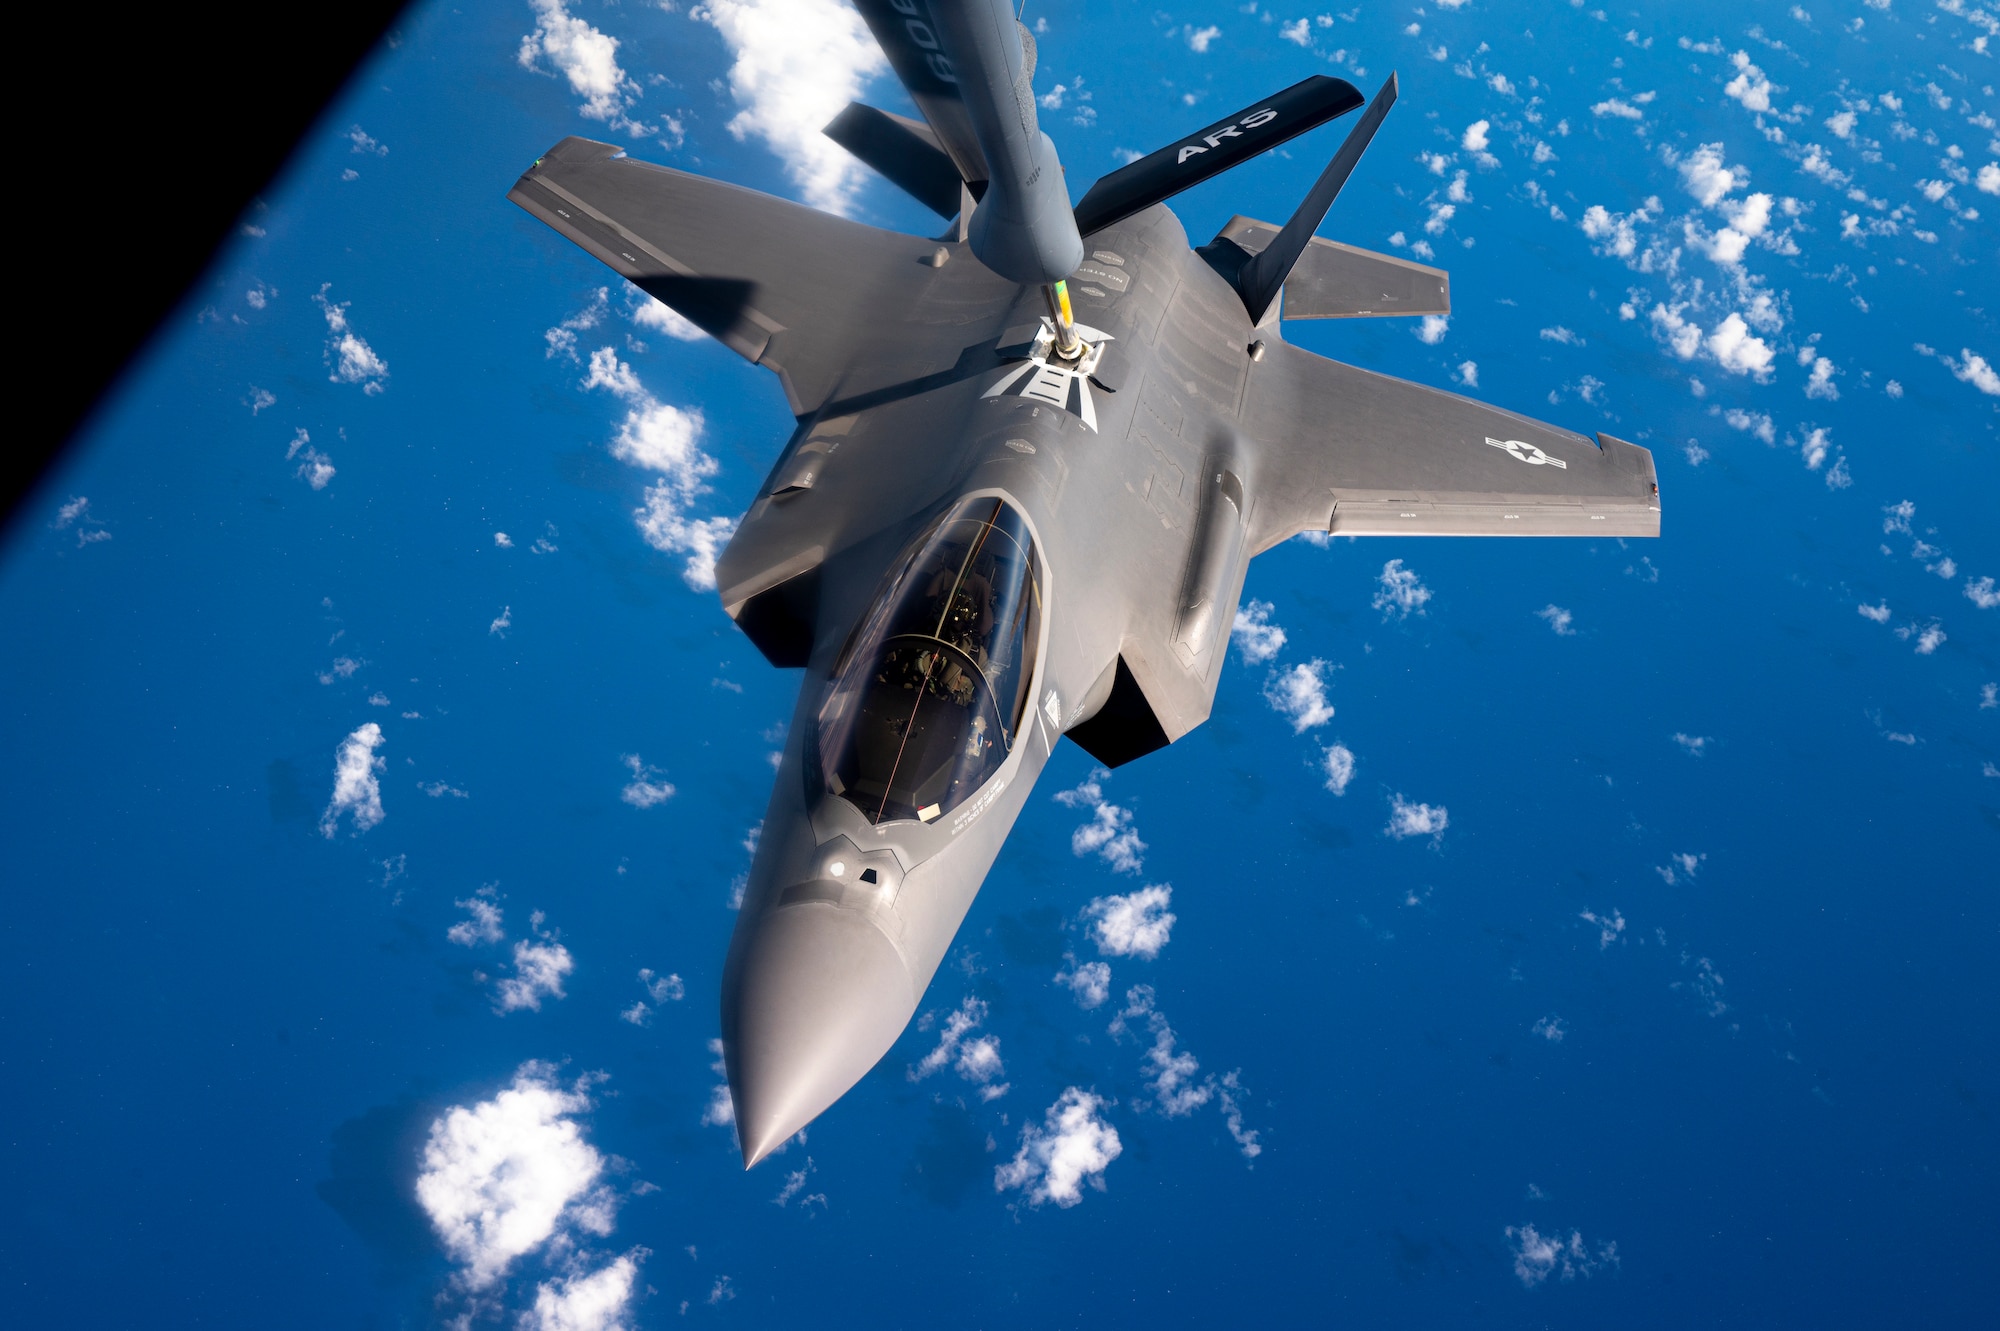 A U.S. Air Force F-35A Lightning II pilot assigned to the 421st Fisgter Squadron, Hill Air Force Base, Utah, receives fuel from a U.S. Air Force KC-135 Stratotanker aircraft assigned to the 506th Expeditionary Air Refueling Squadron, Andersen Air Force Base, Guam, over the Pacific Ocean, while conducting Agile Combat Employment (ACE) rehearsals, June 28, 2022.